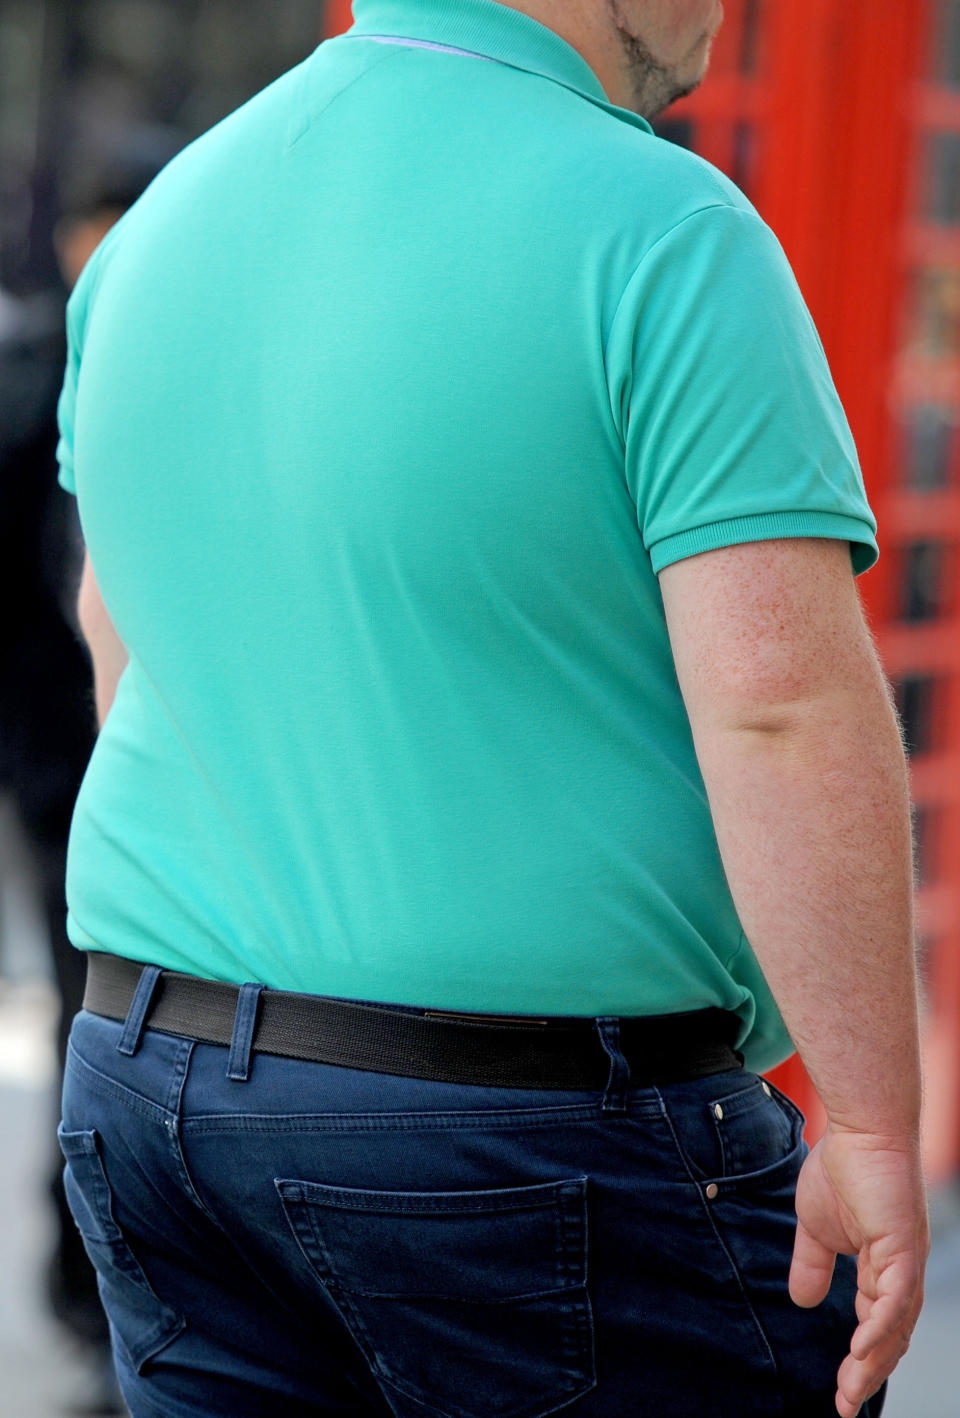 <em>Obesity could knock 4.2 years of life expectancy in men, and 3.5 in women (Picture: PA)</em>